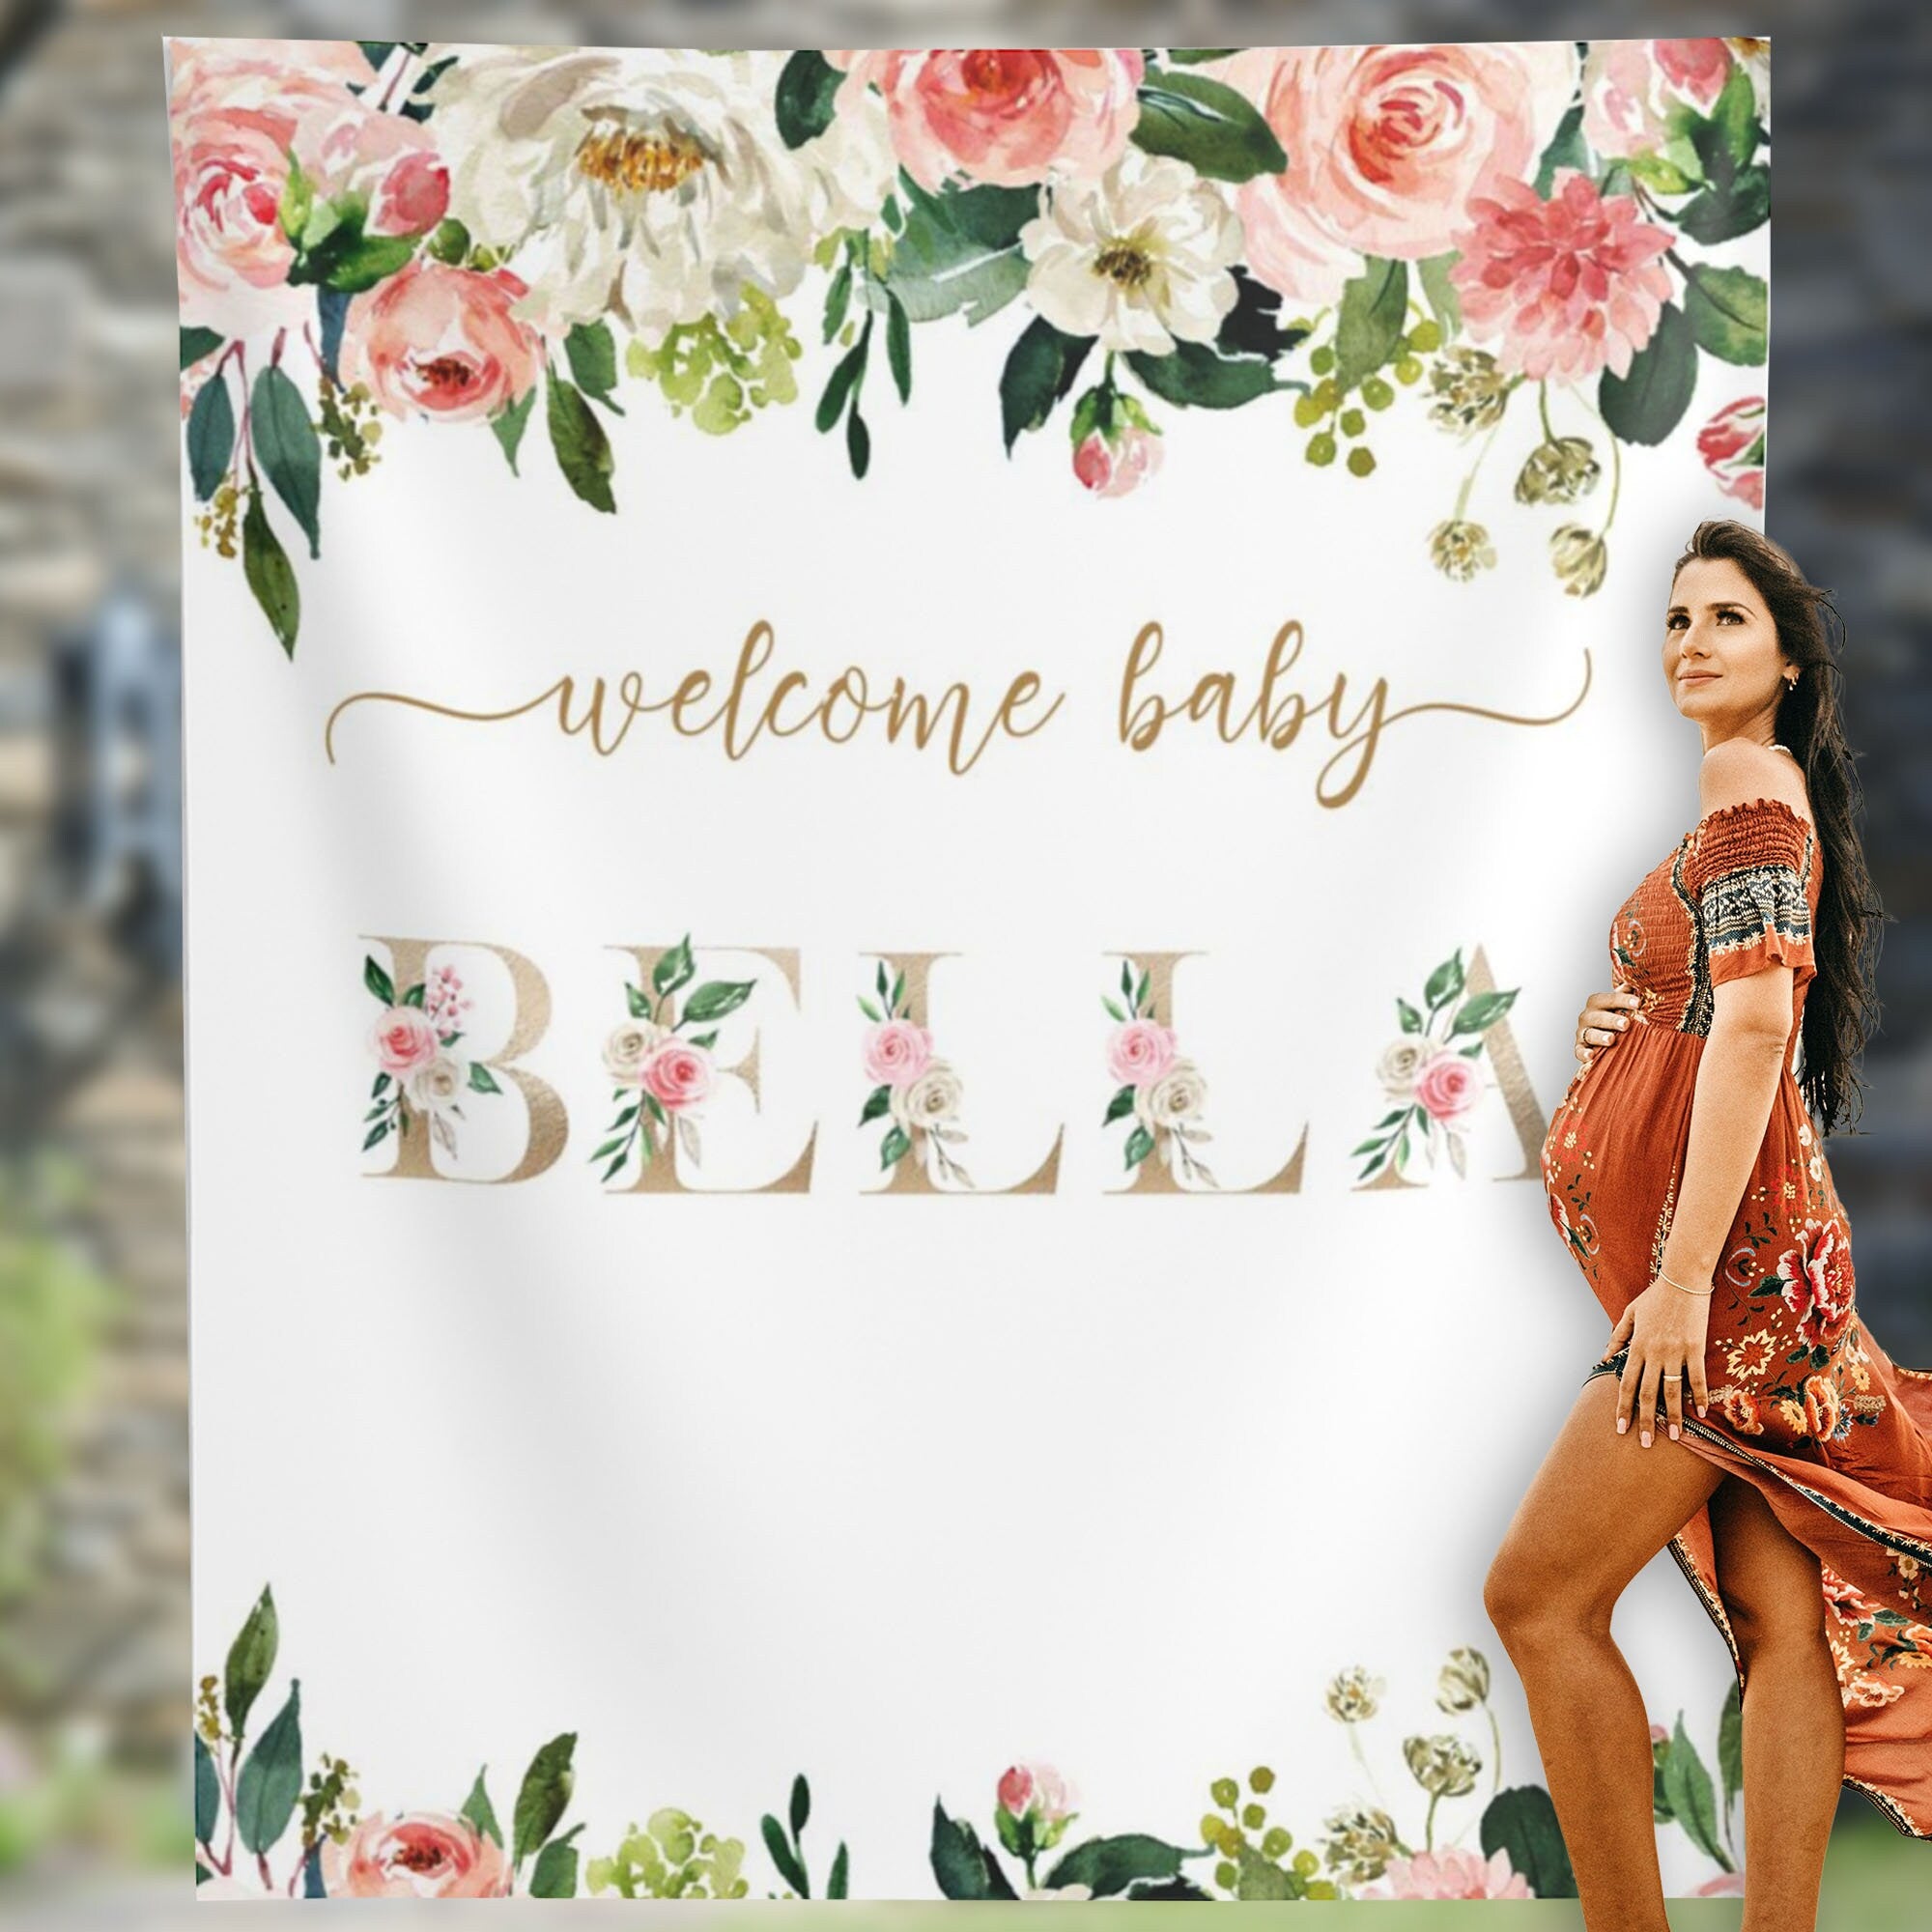 Baby Shower Decoration Girl, Floral Baby Shower Backdrop, Girl Baby Shower Decoration, Welcome Baby Backdrop, It's a girl banner 01BAS75